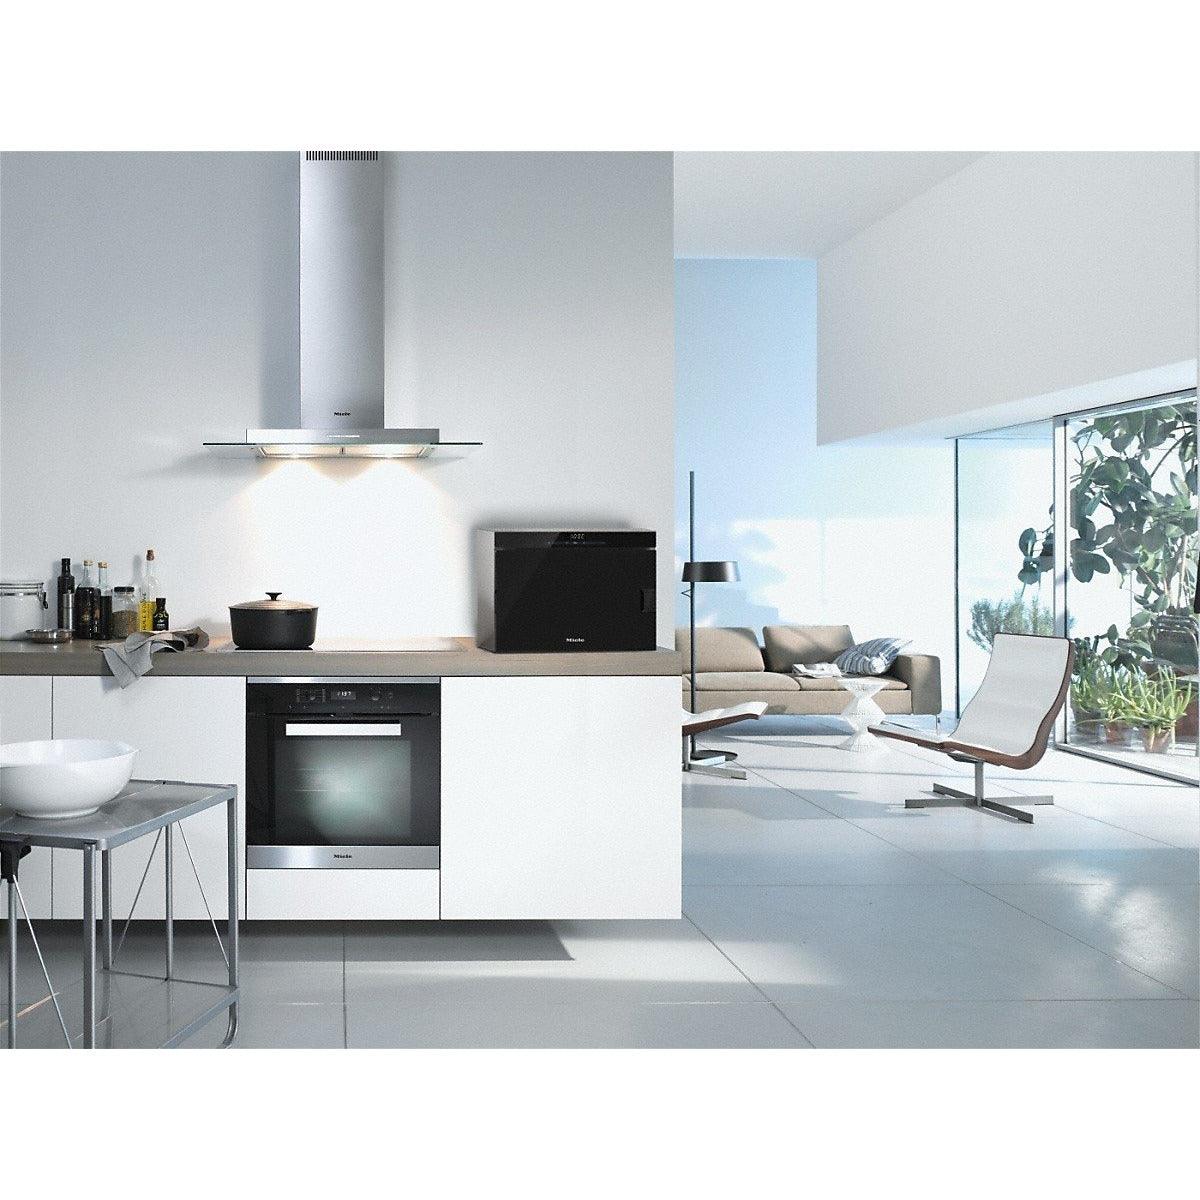 Miele Freestanding Steam Single Oven - Obsidian Black | DG6010 from DID Electrical - guaranteed Irish, guaranteed quality service. (6890745954492)